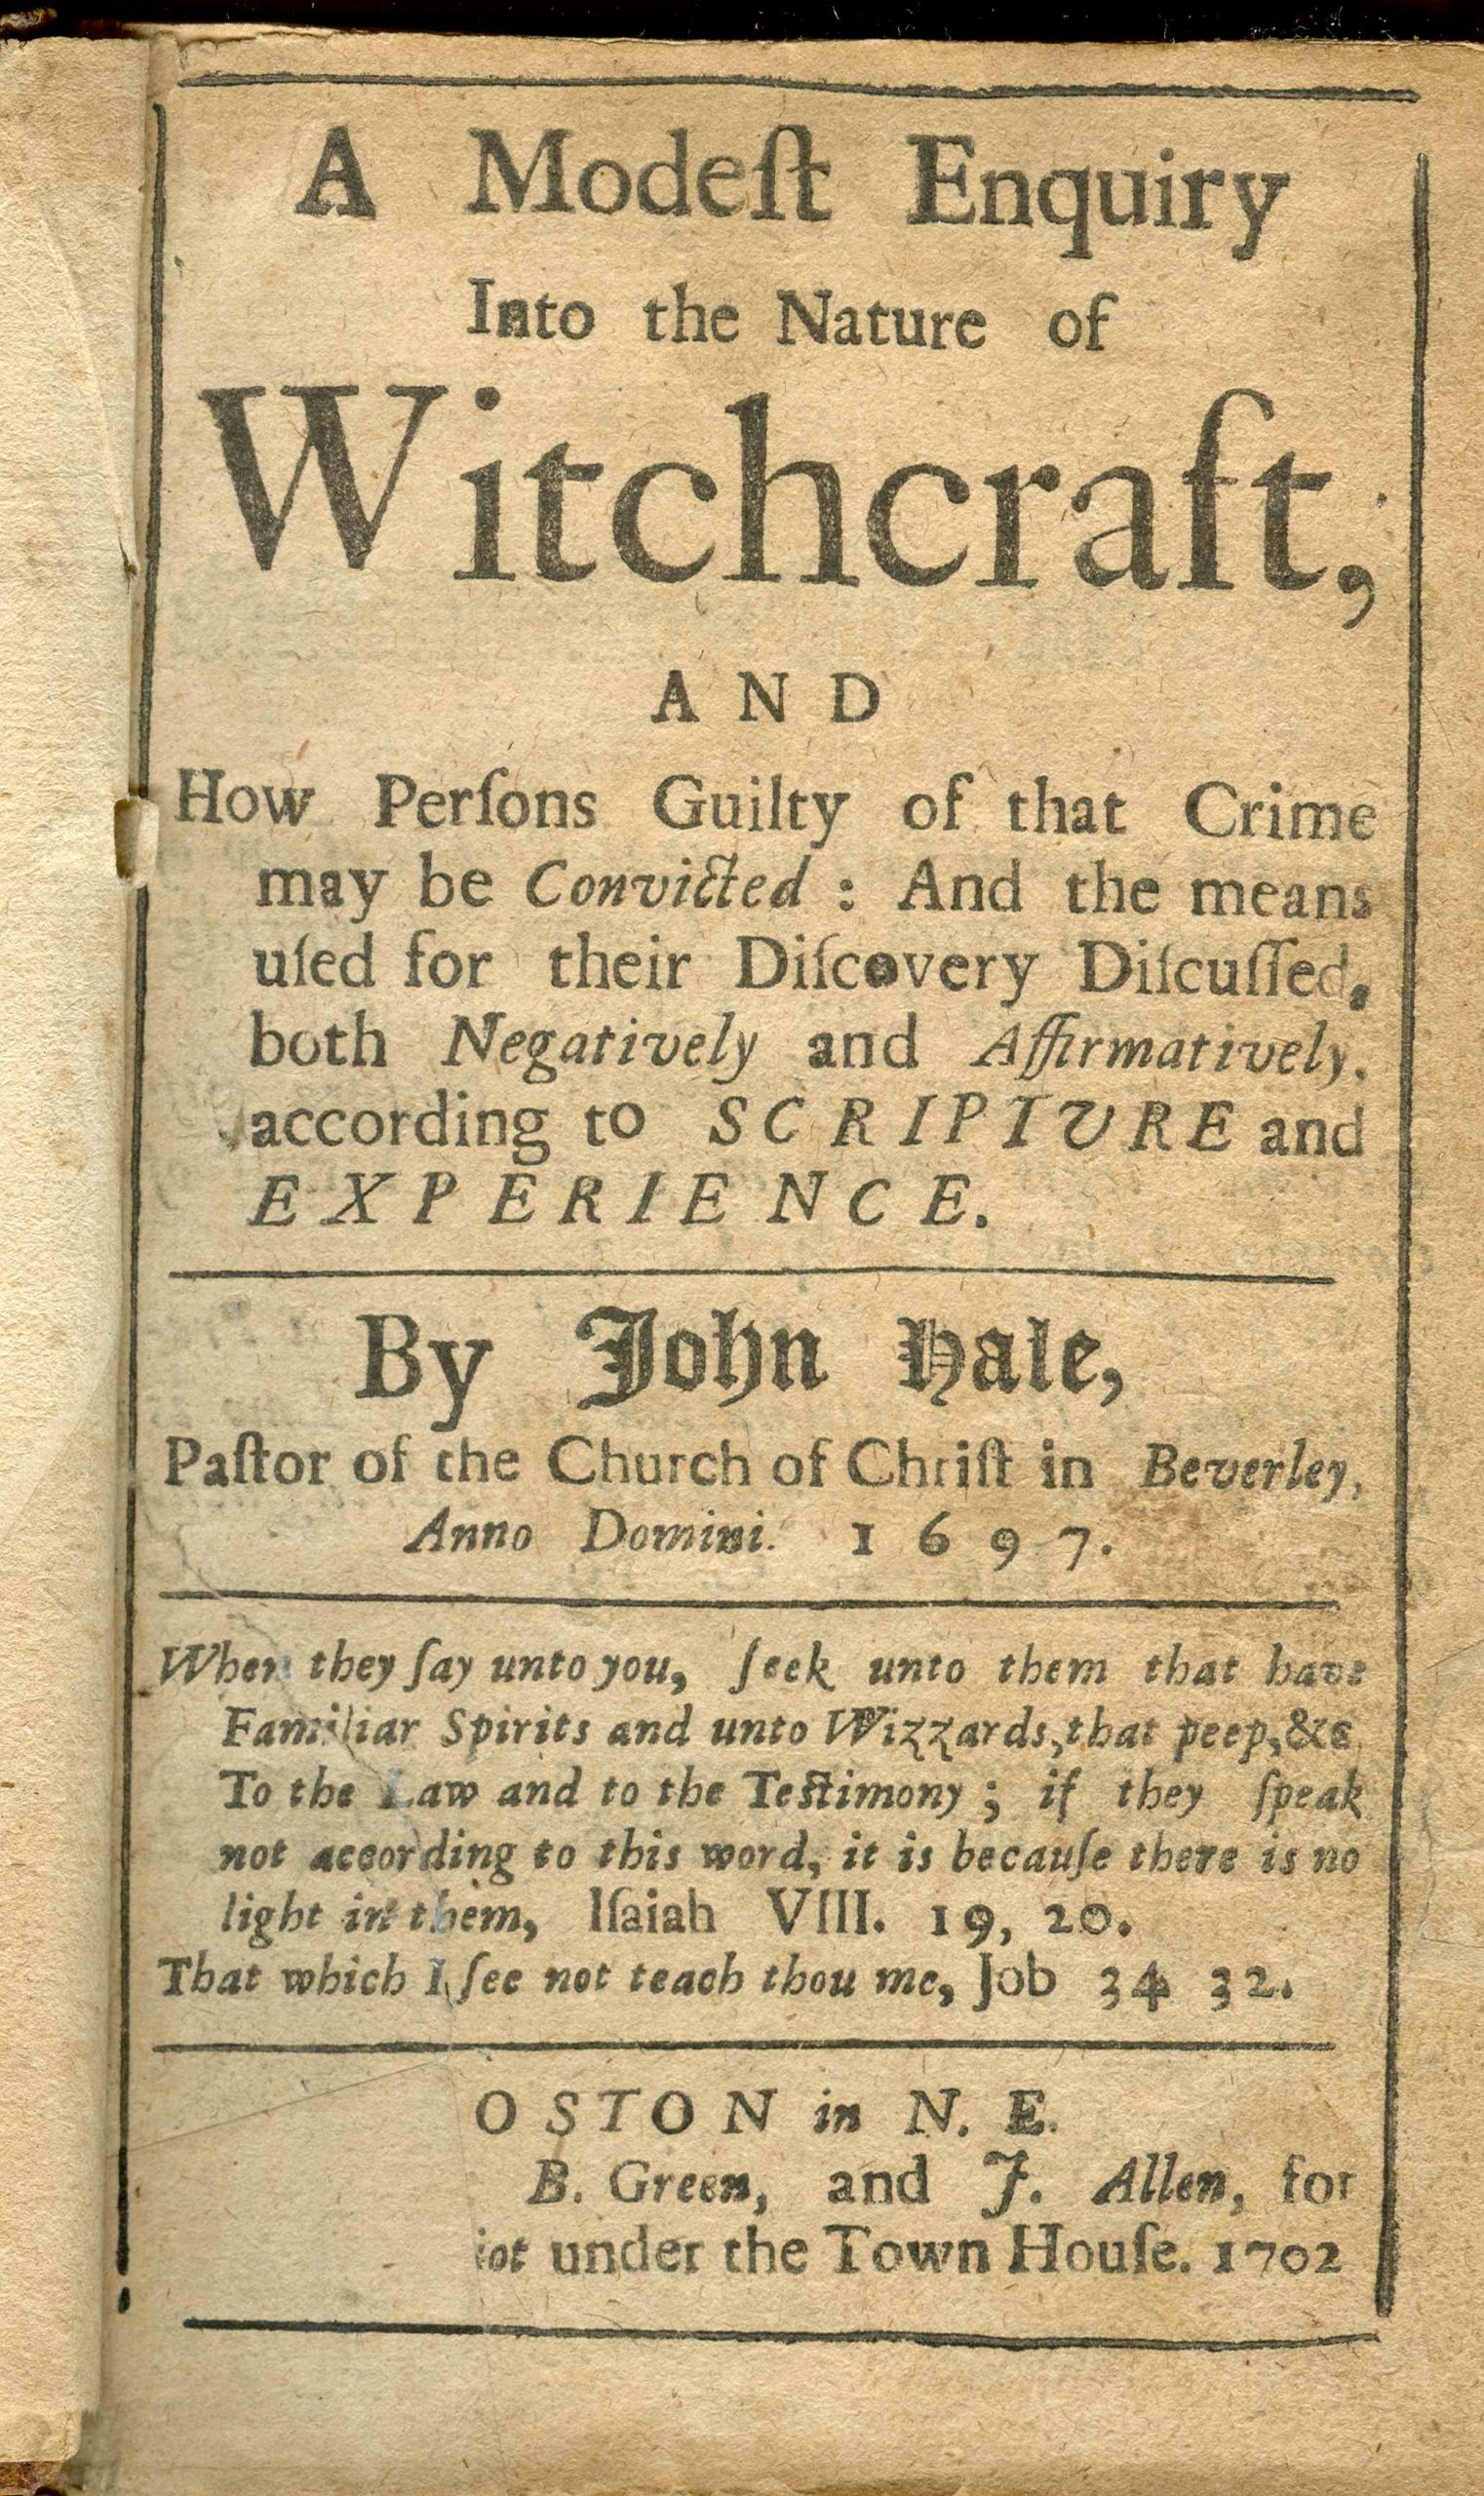 "A Modest Inquiry into the Nature of Witchcraft" by Rev. John Hale, published 1702.